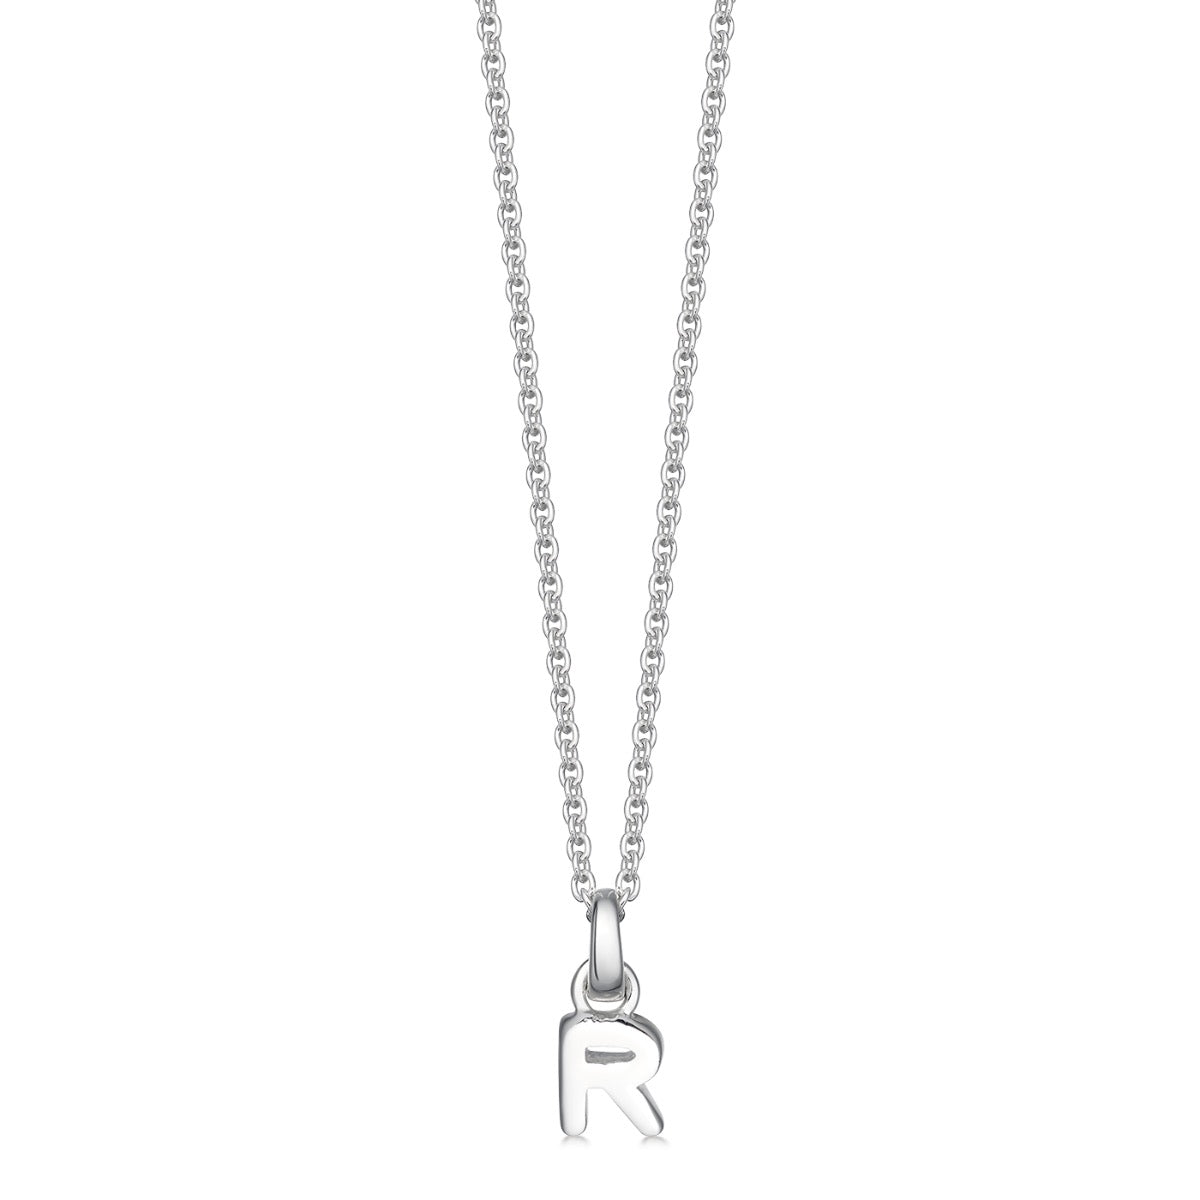 Mini Silver Letter "R" Initial Necklace